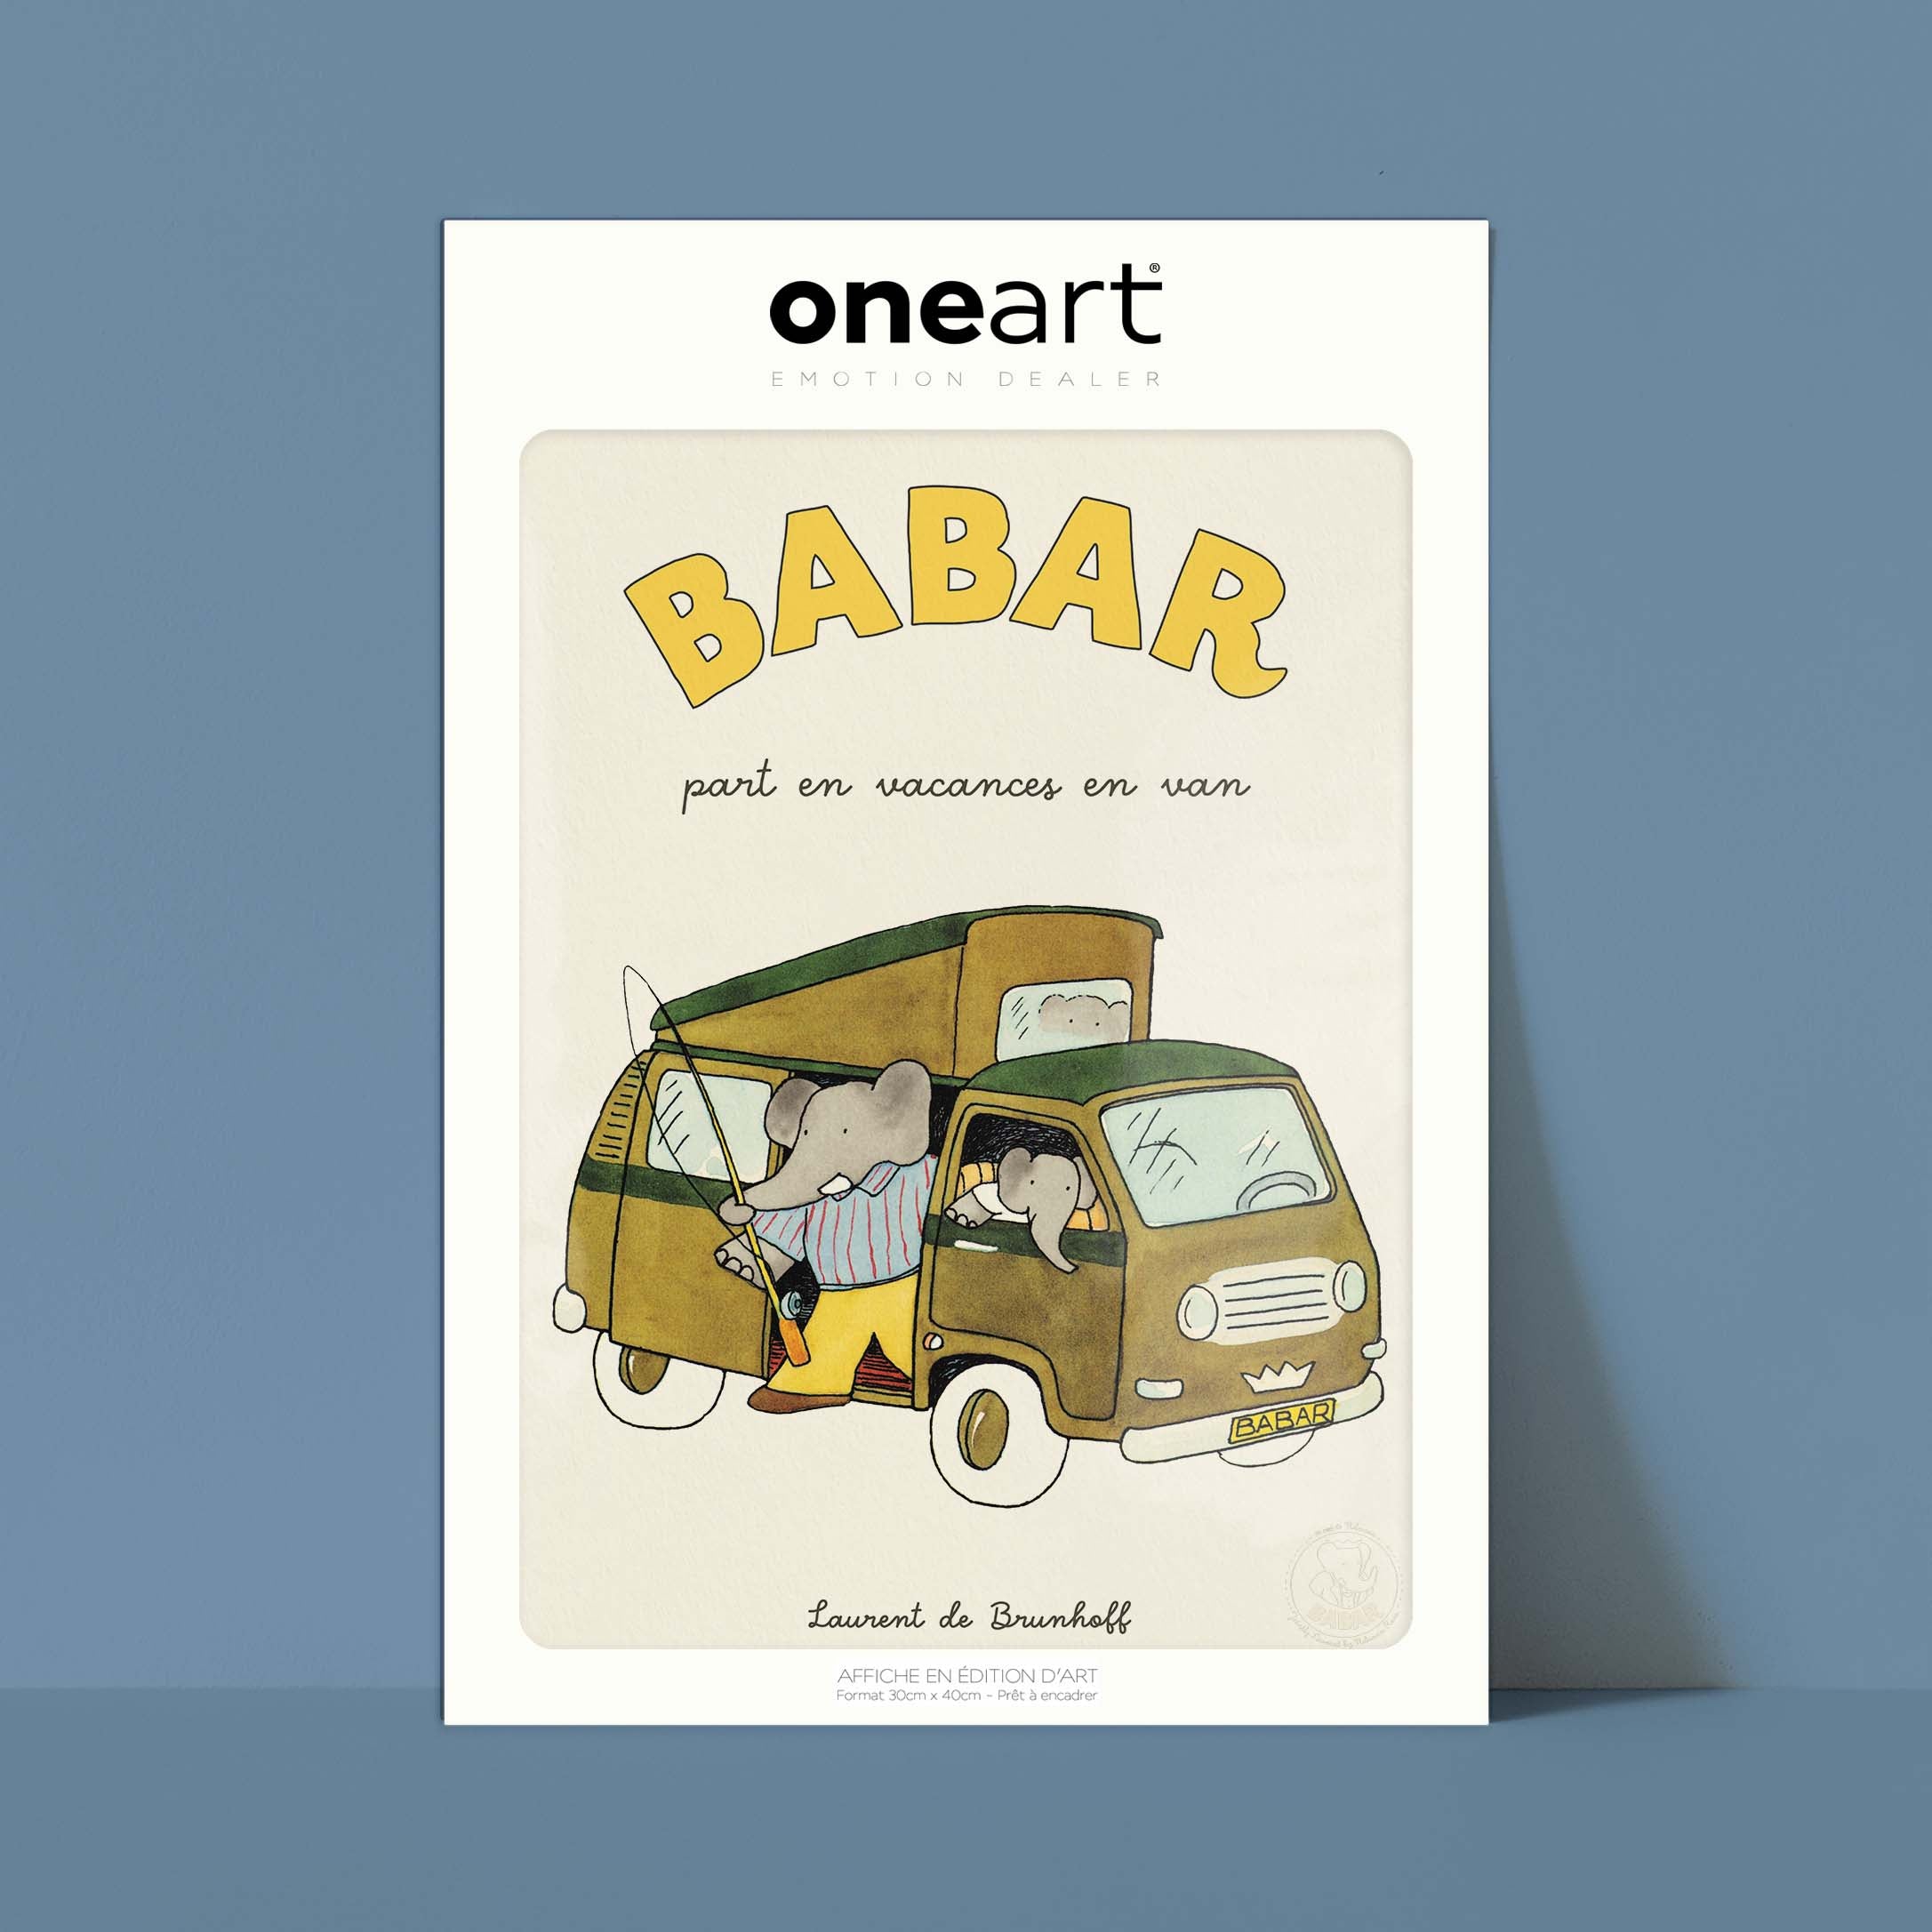 Poster Babar goes on vacation in a van